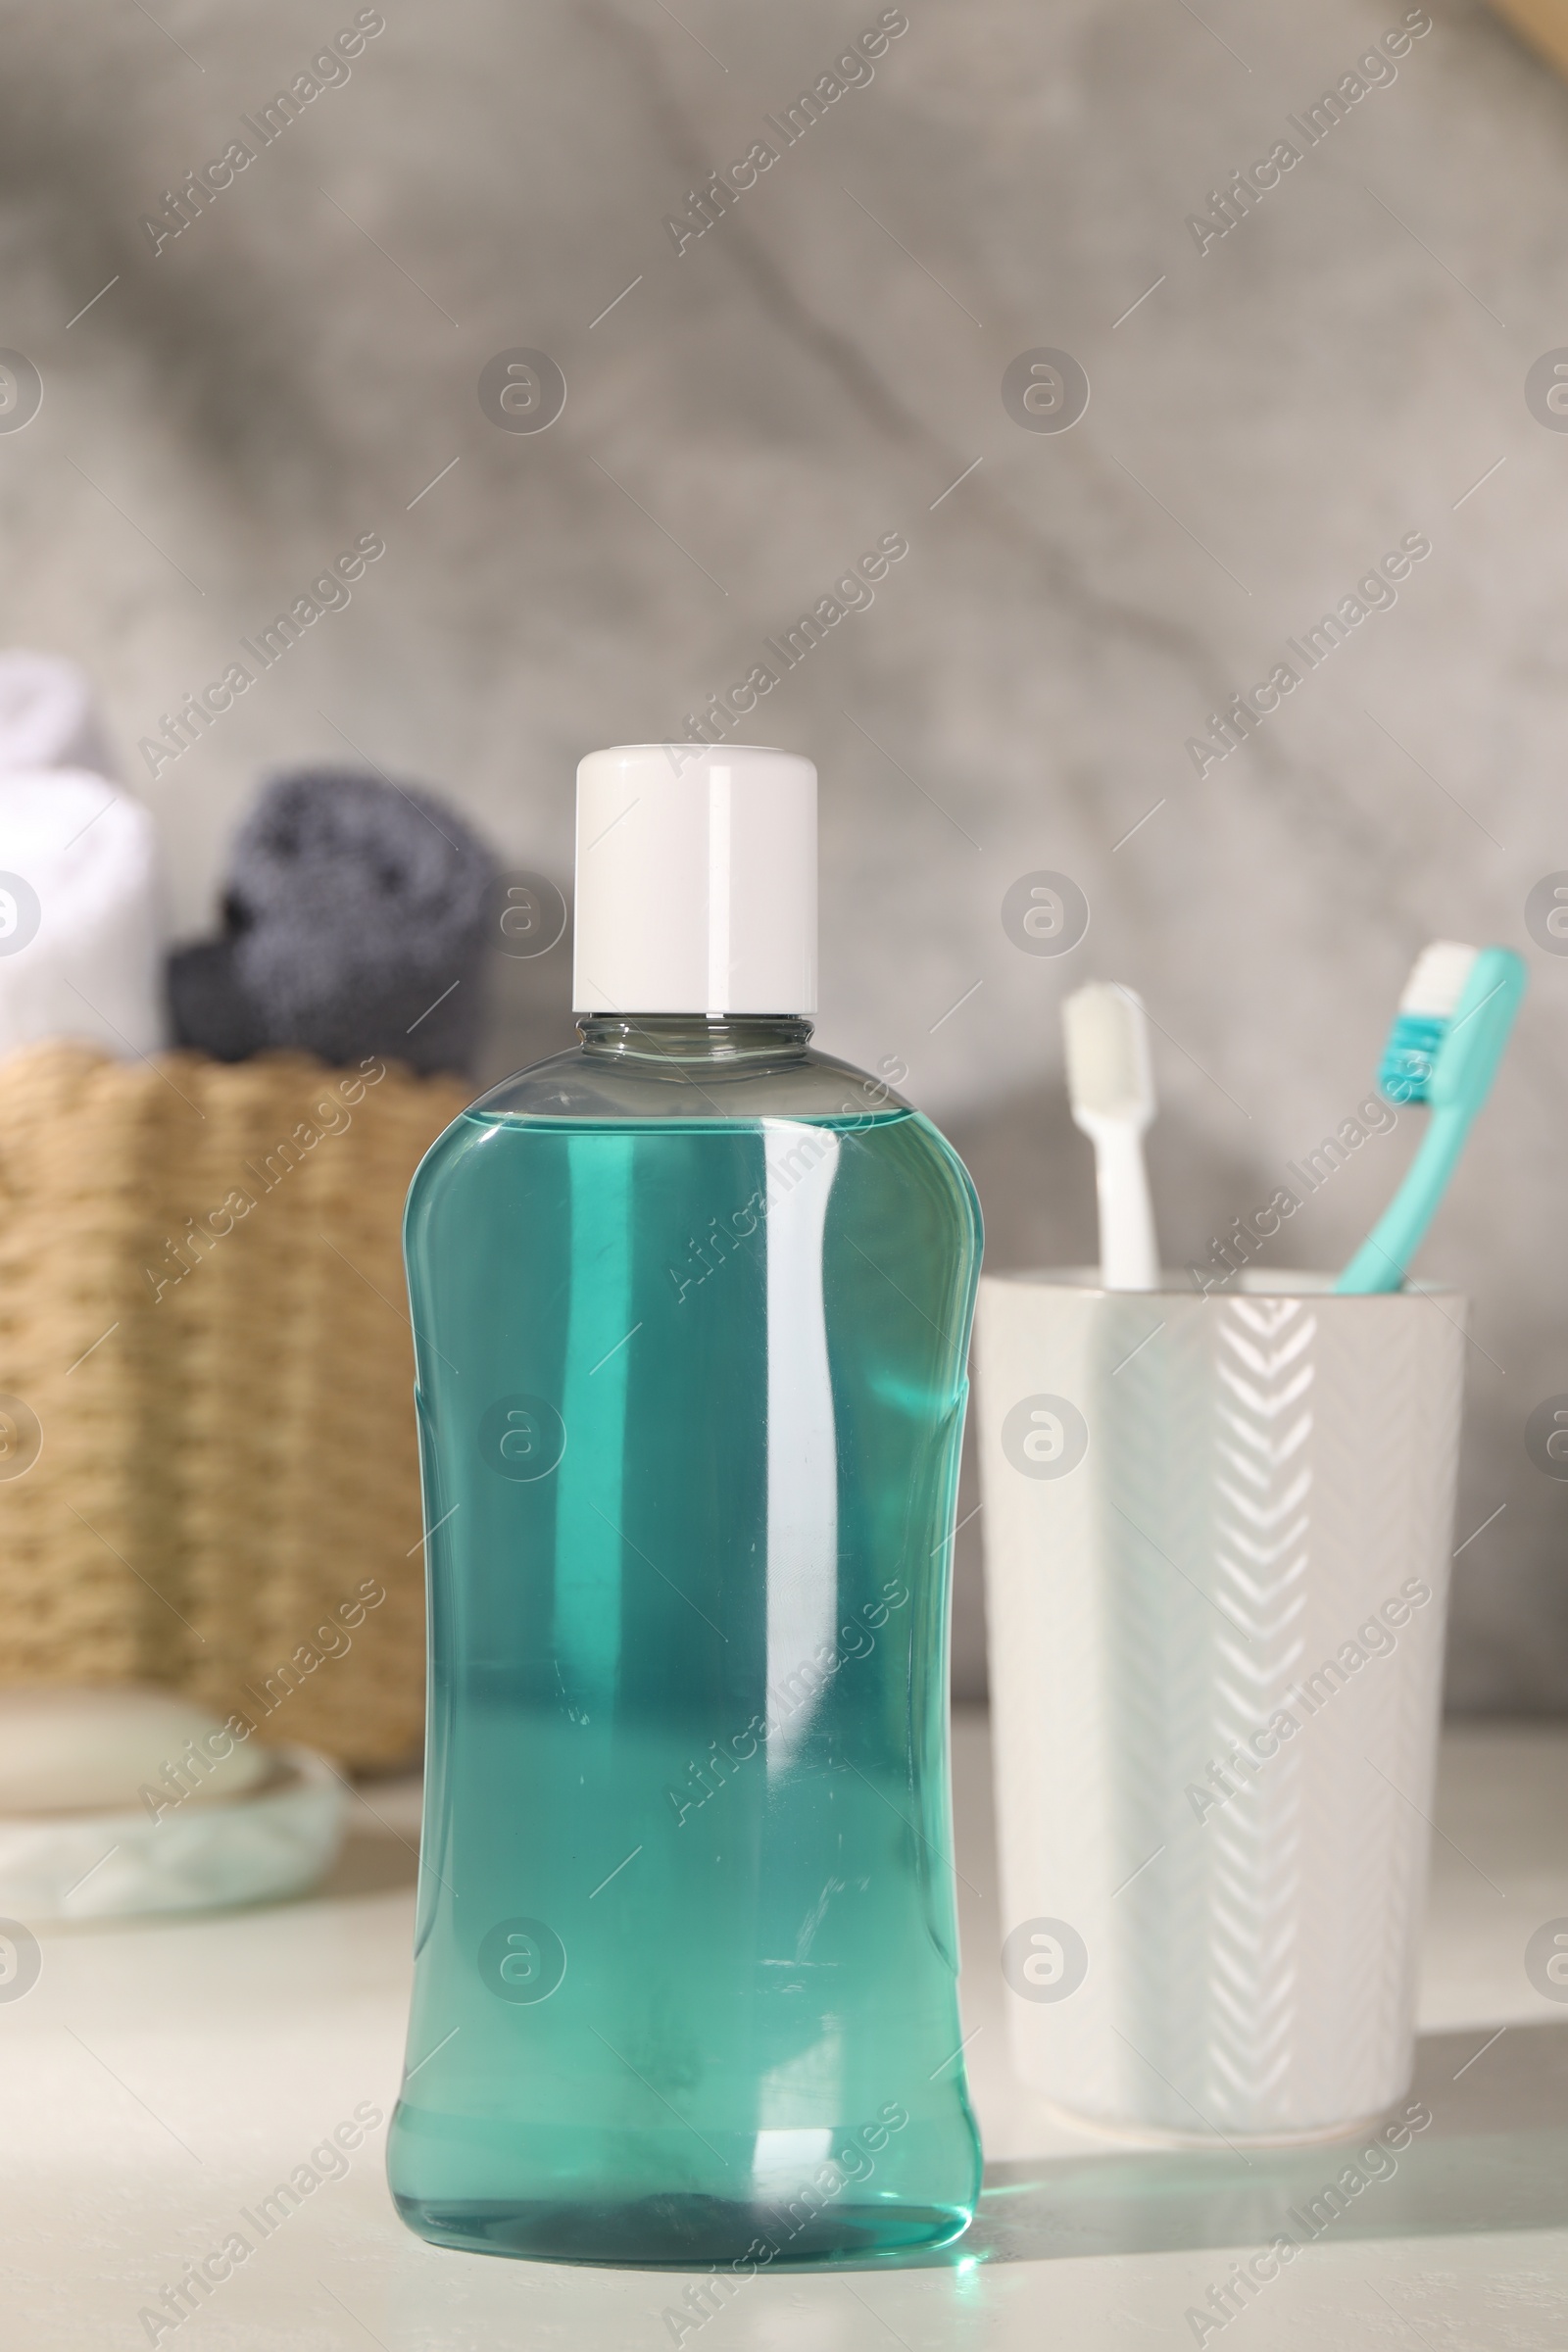 Photo of Bottle of mouthwash and toothbrushes on light table in bathroom